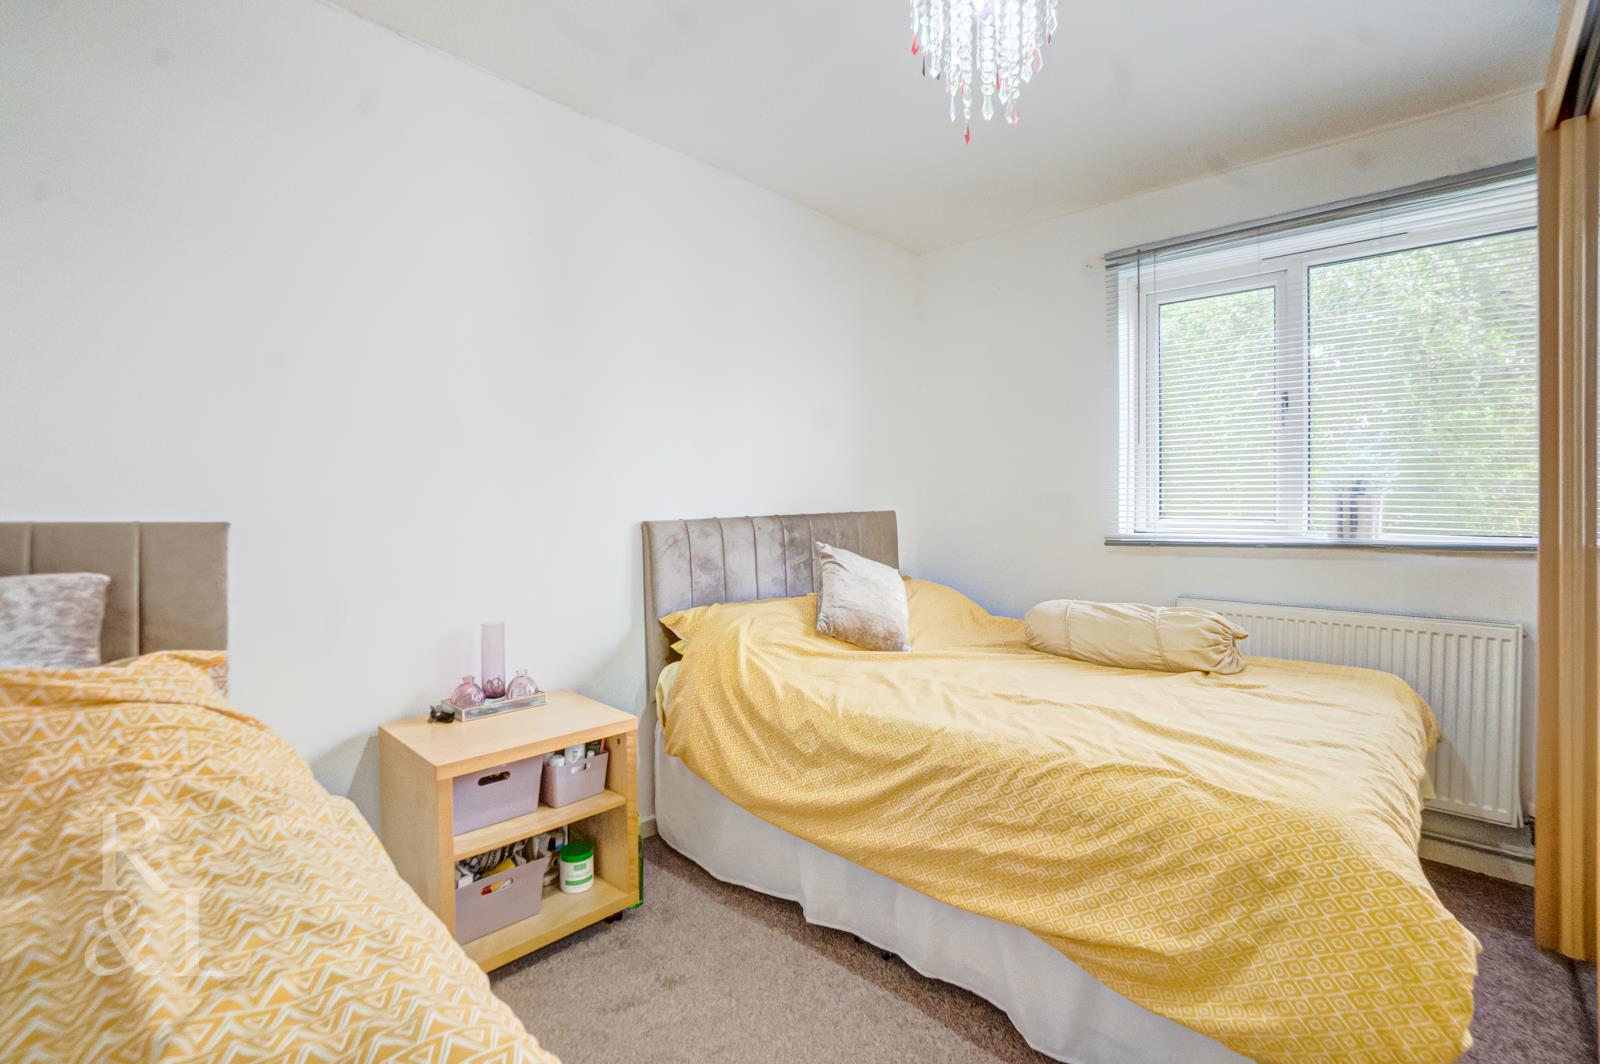 Property image for Arkwright Walk, Meadows, Nottingham